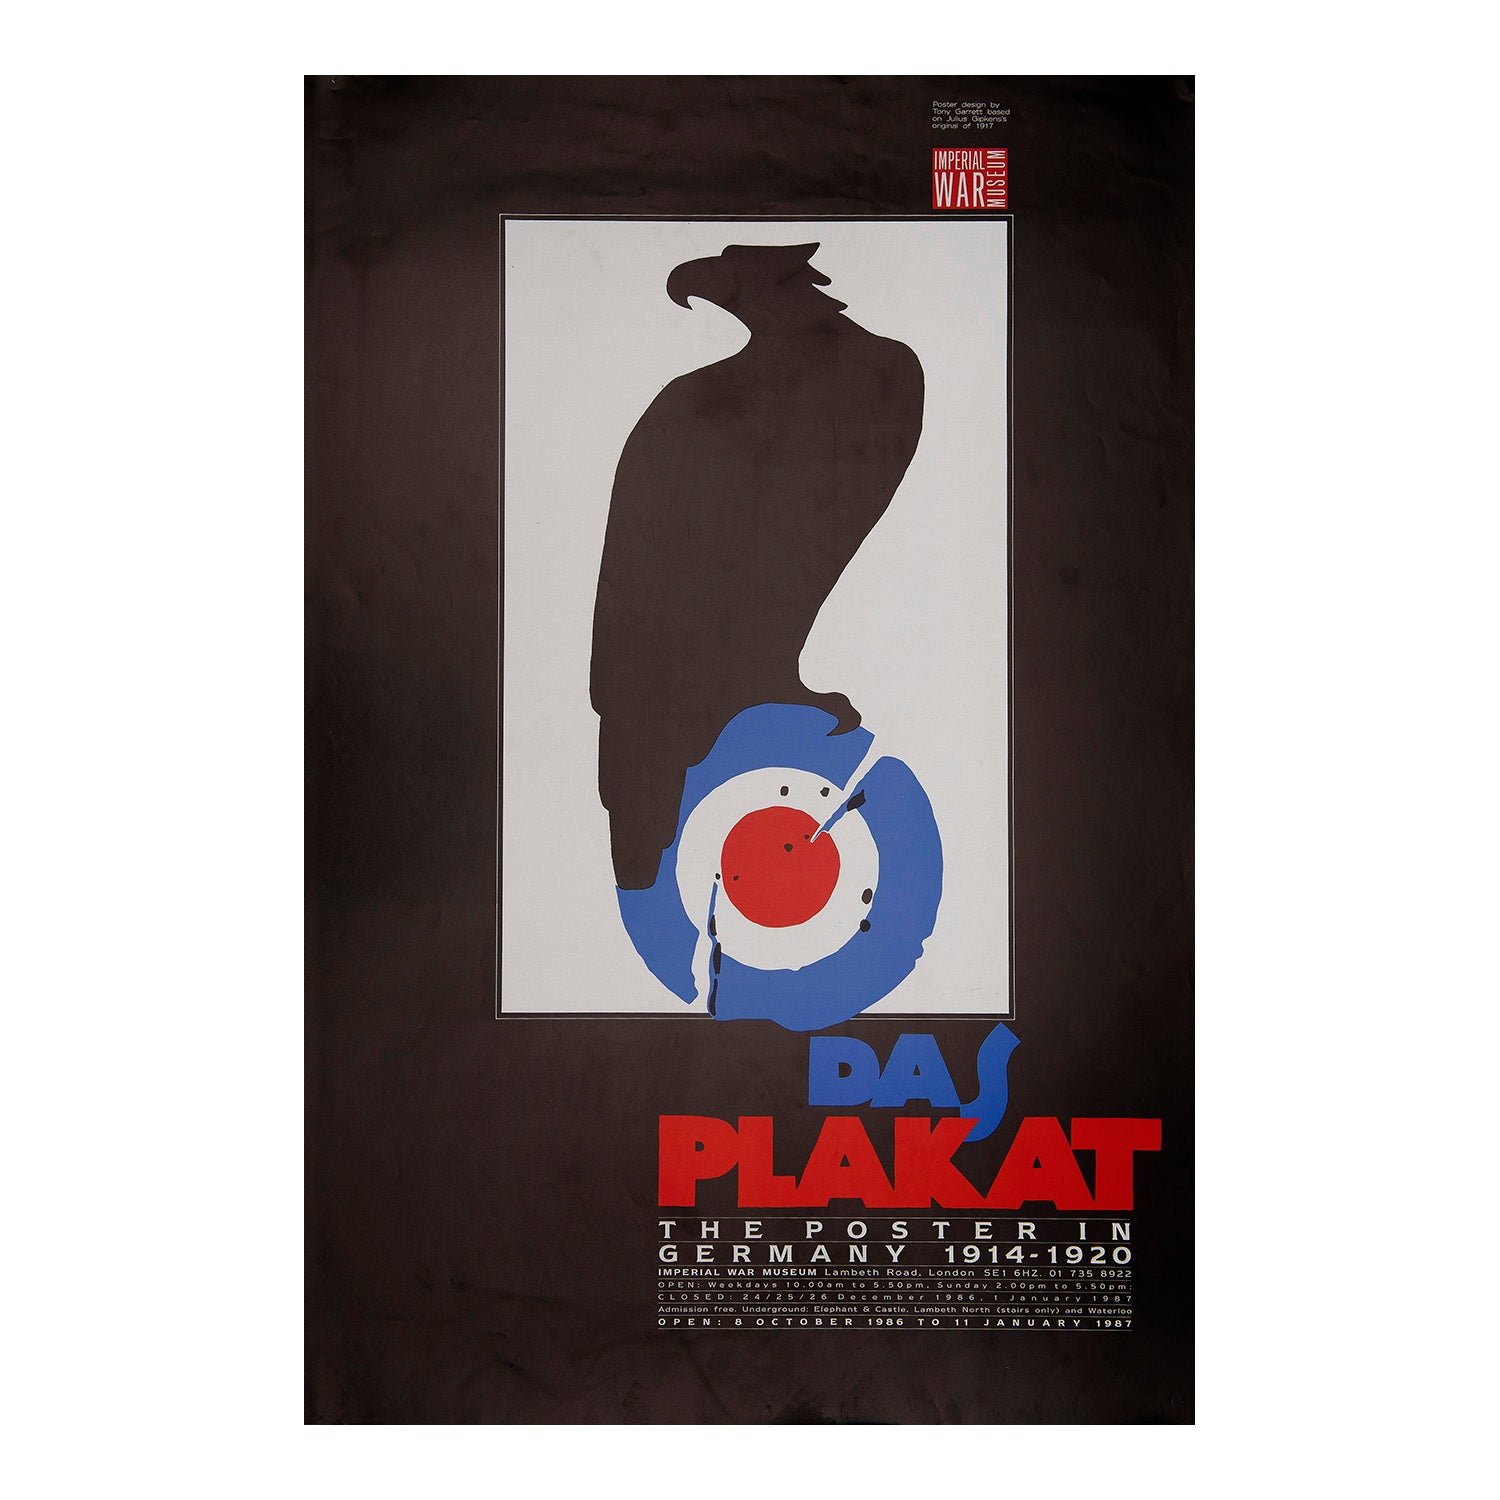 Das Plakat. The Poster in Germany 1914-1920